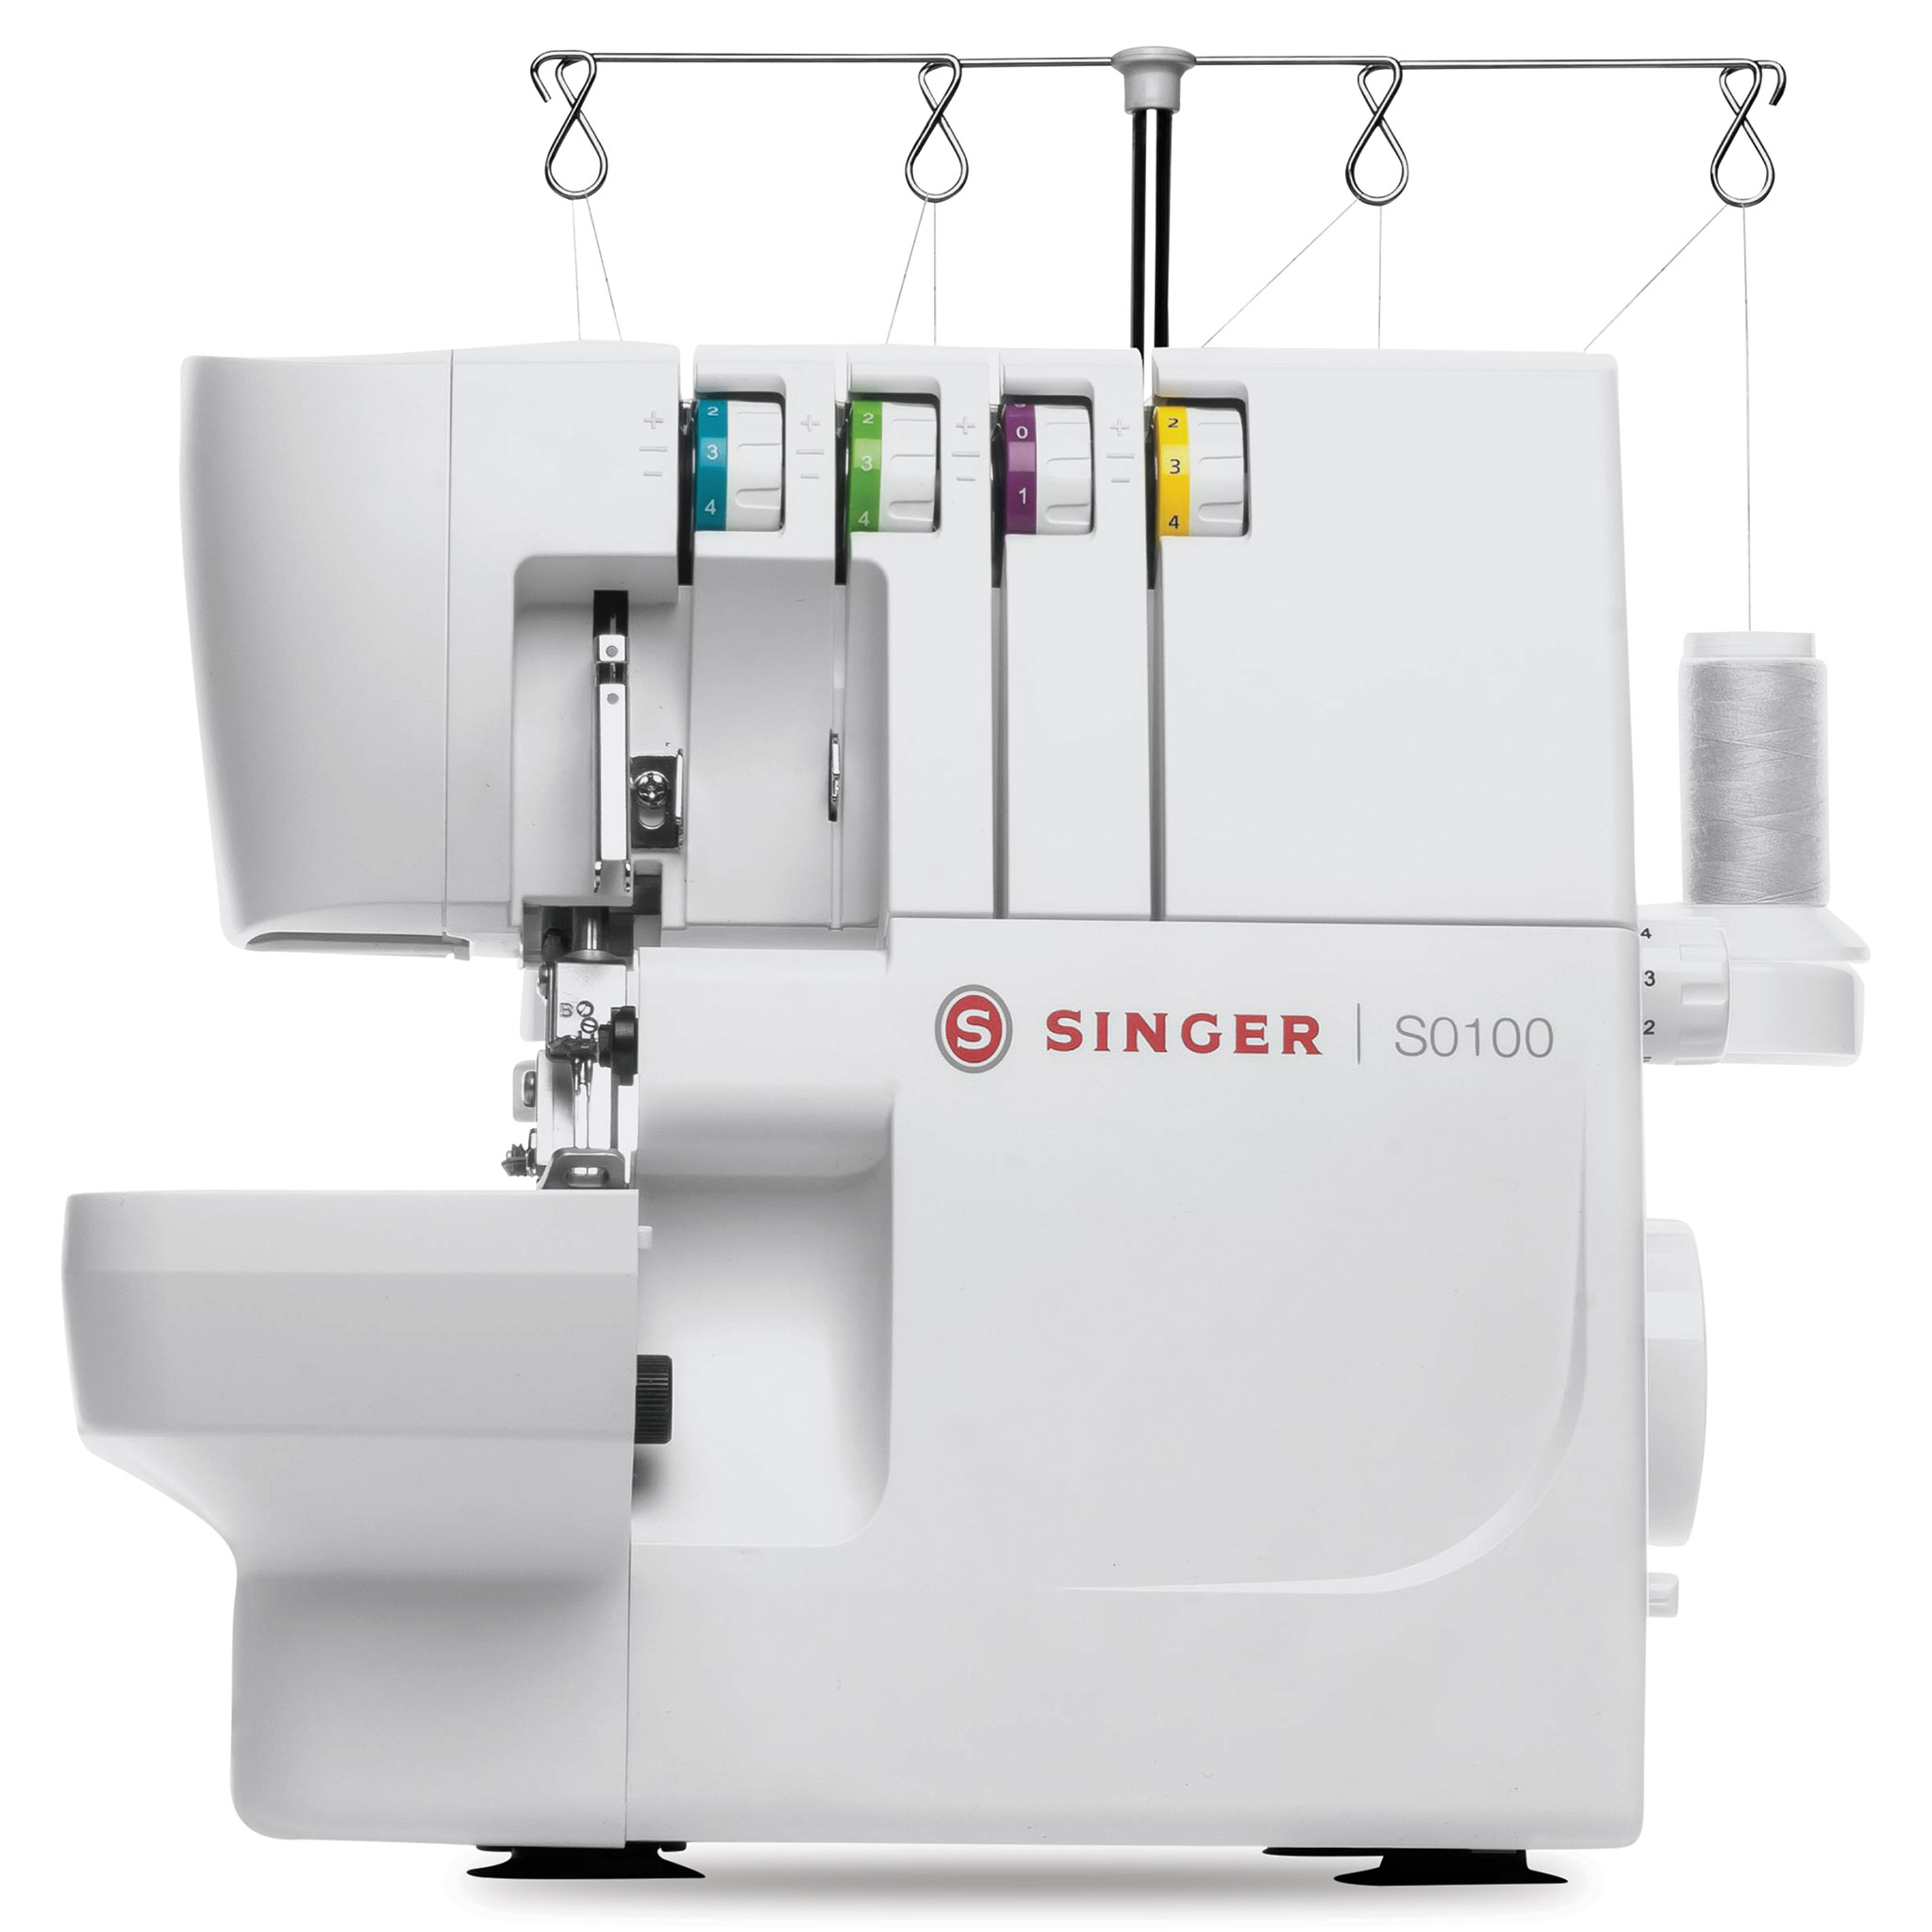 SINGER Making The Cut Sewing Machine with 97 Stitch Applications &  Accessory Kit M3330, Simple & Easy To Use, Perfect For Beginners &  Universal Hard